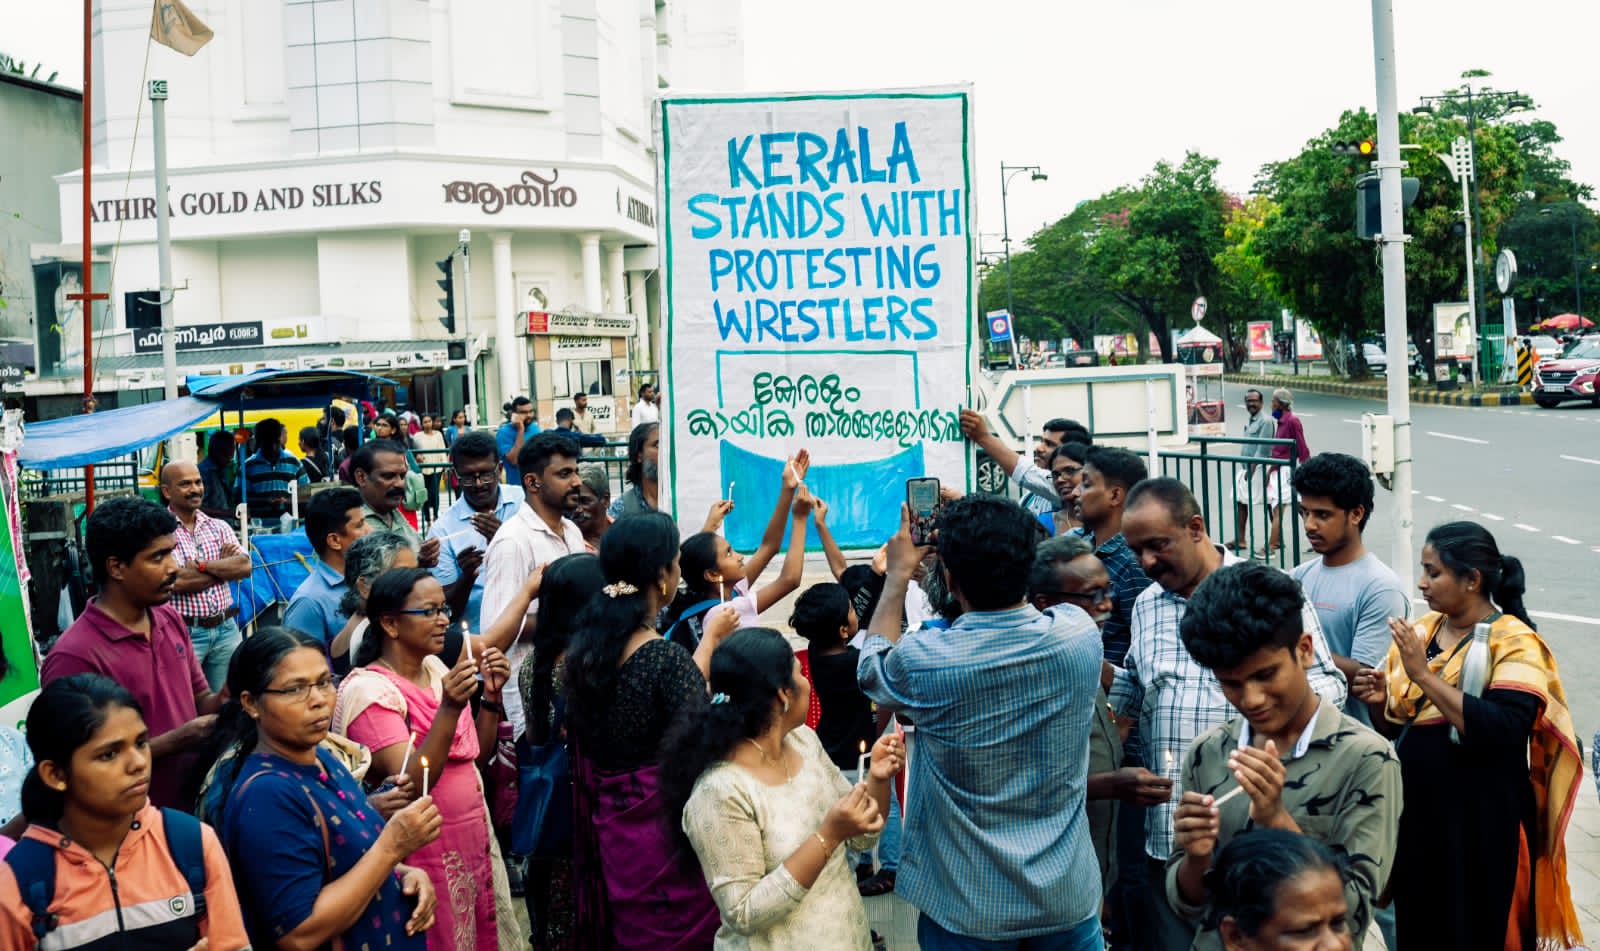 Activists in Kochi, Hyderabad show solidarity with national-level wrestlers protesting sexual harassment